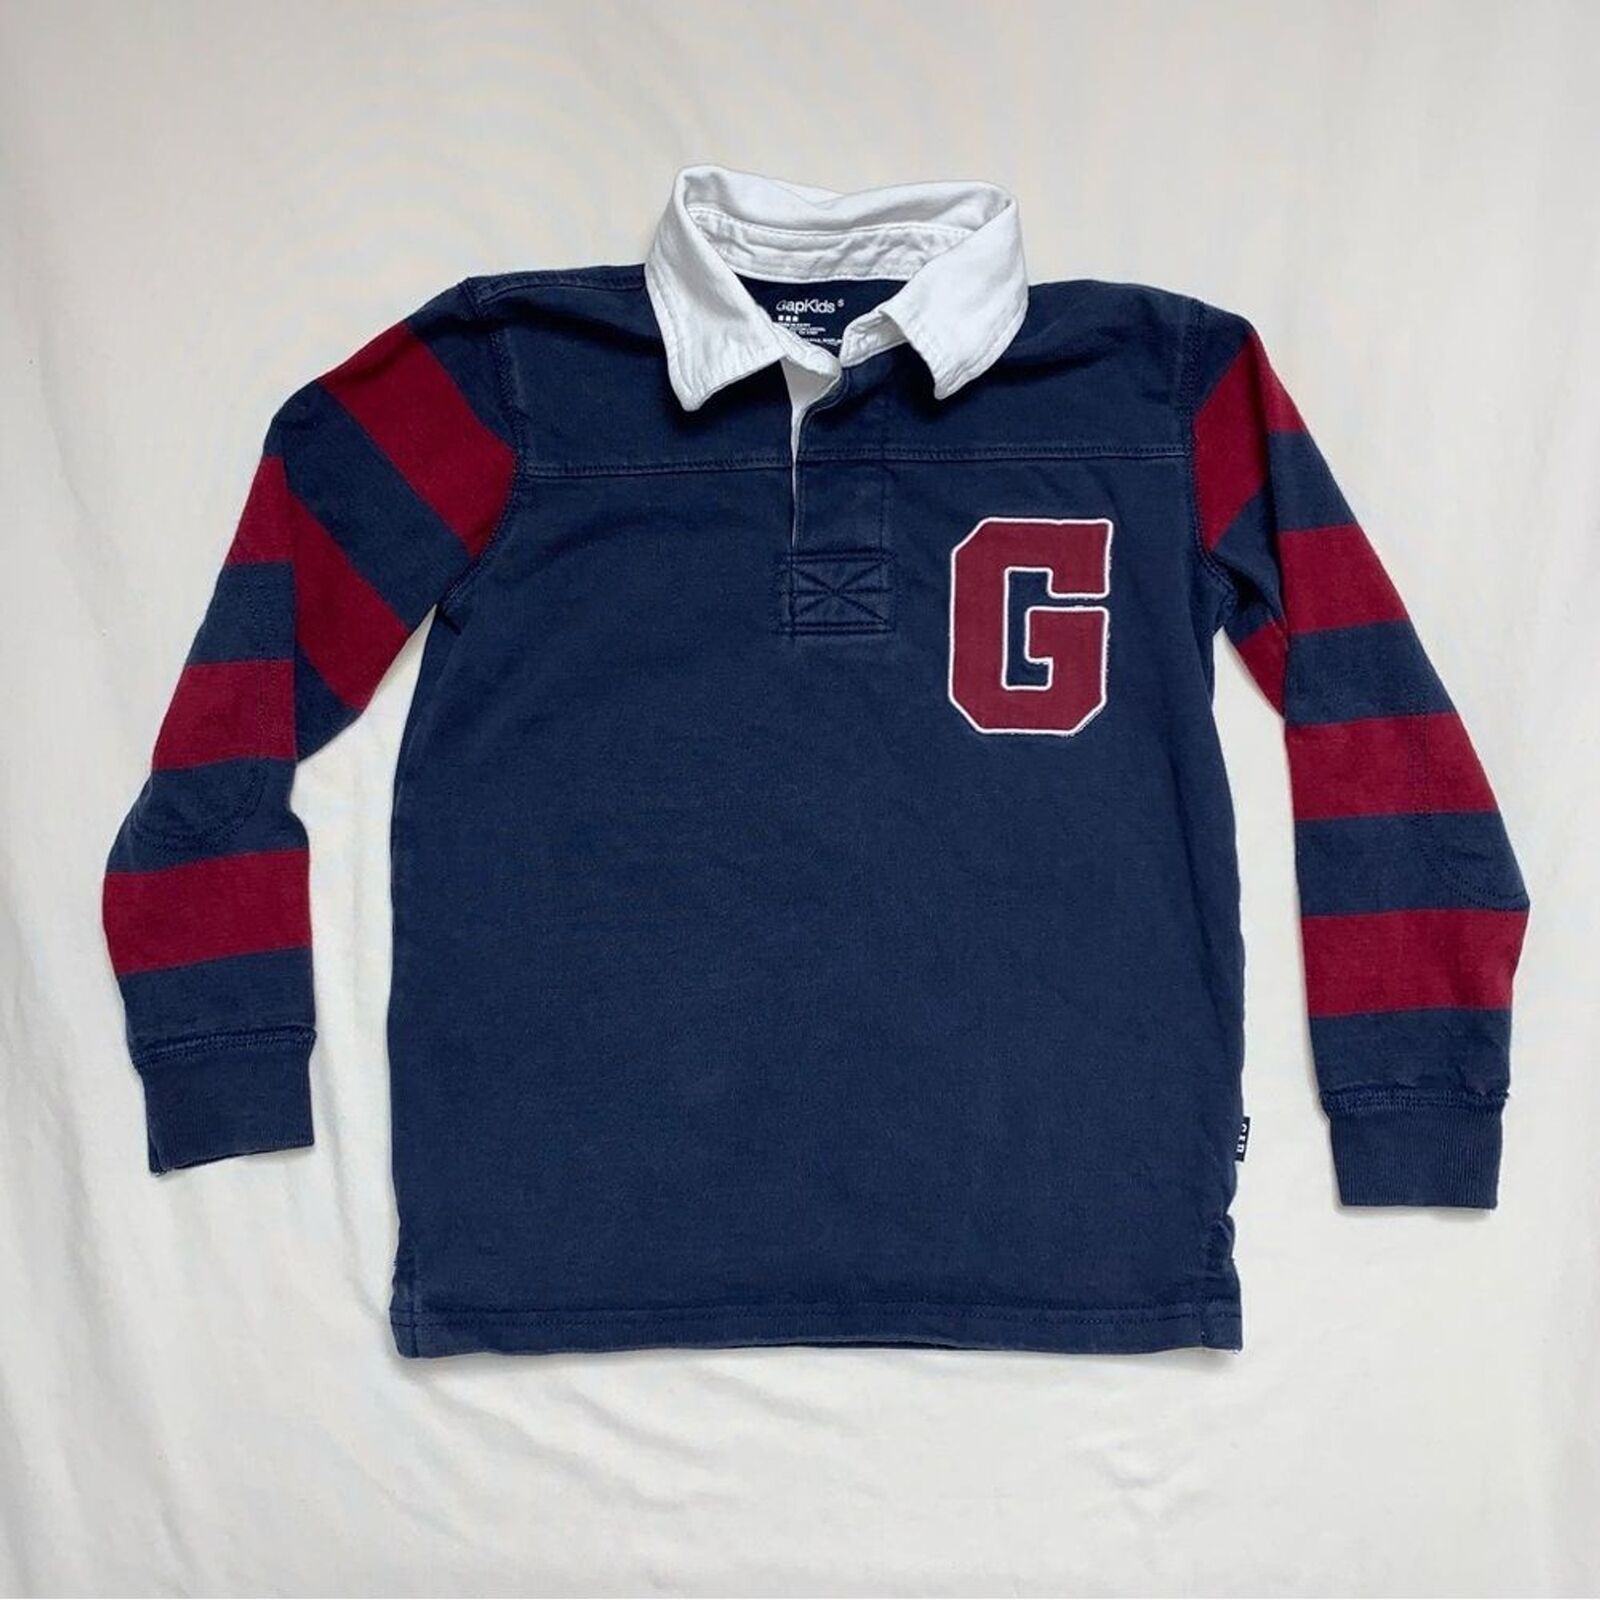 GAP Rugby Polo Shirt Boys Small Preppy Red Blue Striped Long Sleeve Top Fall - $15.84